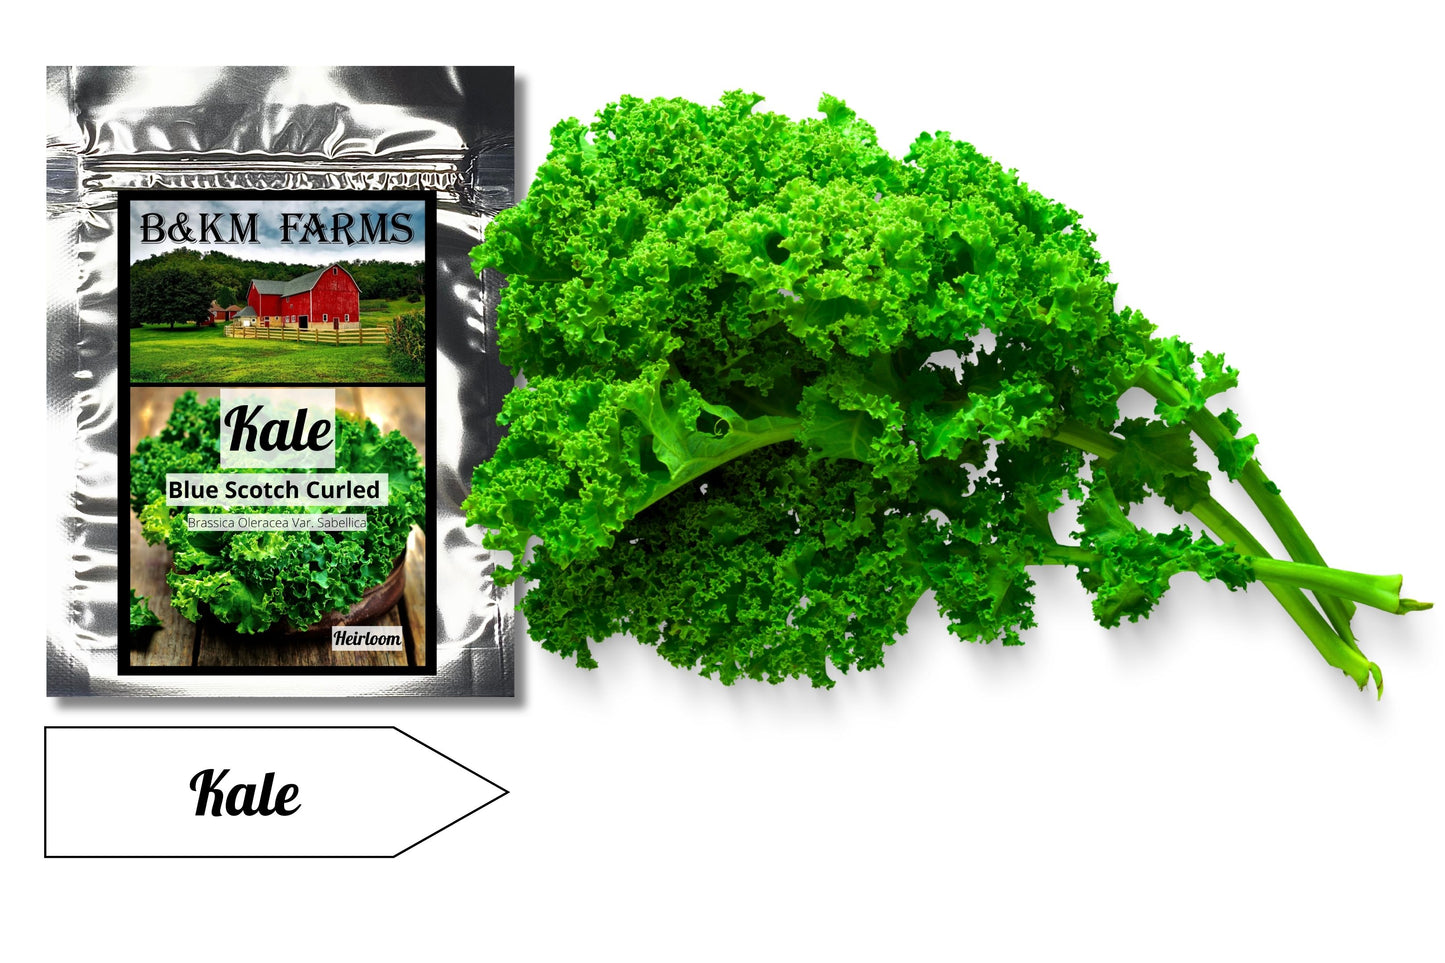 Kale Vates Blue Scotch Curled: Winter's Emerald Gems, Grown from Your Garden